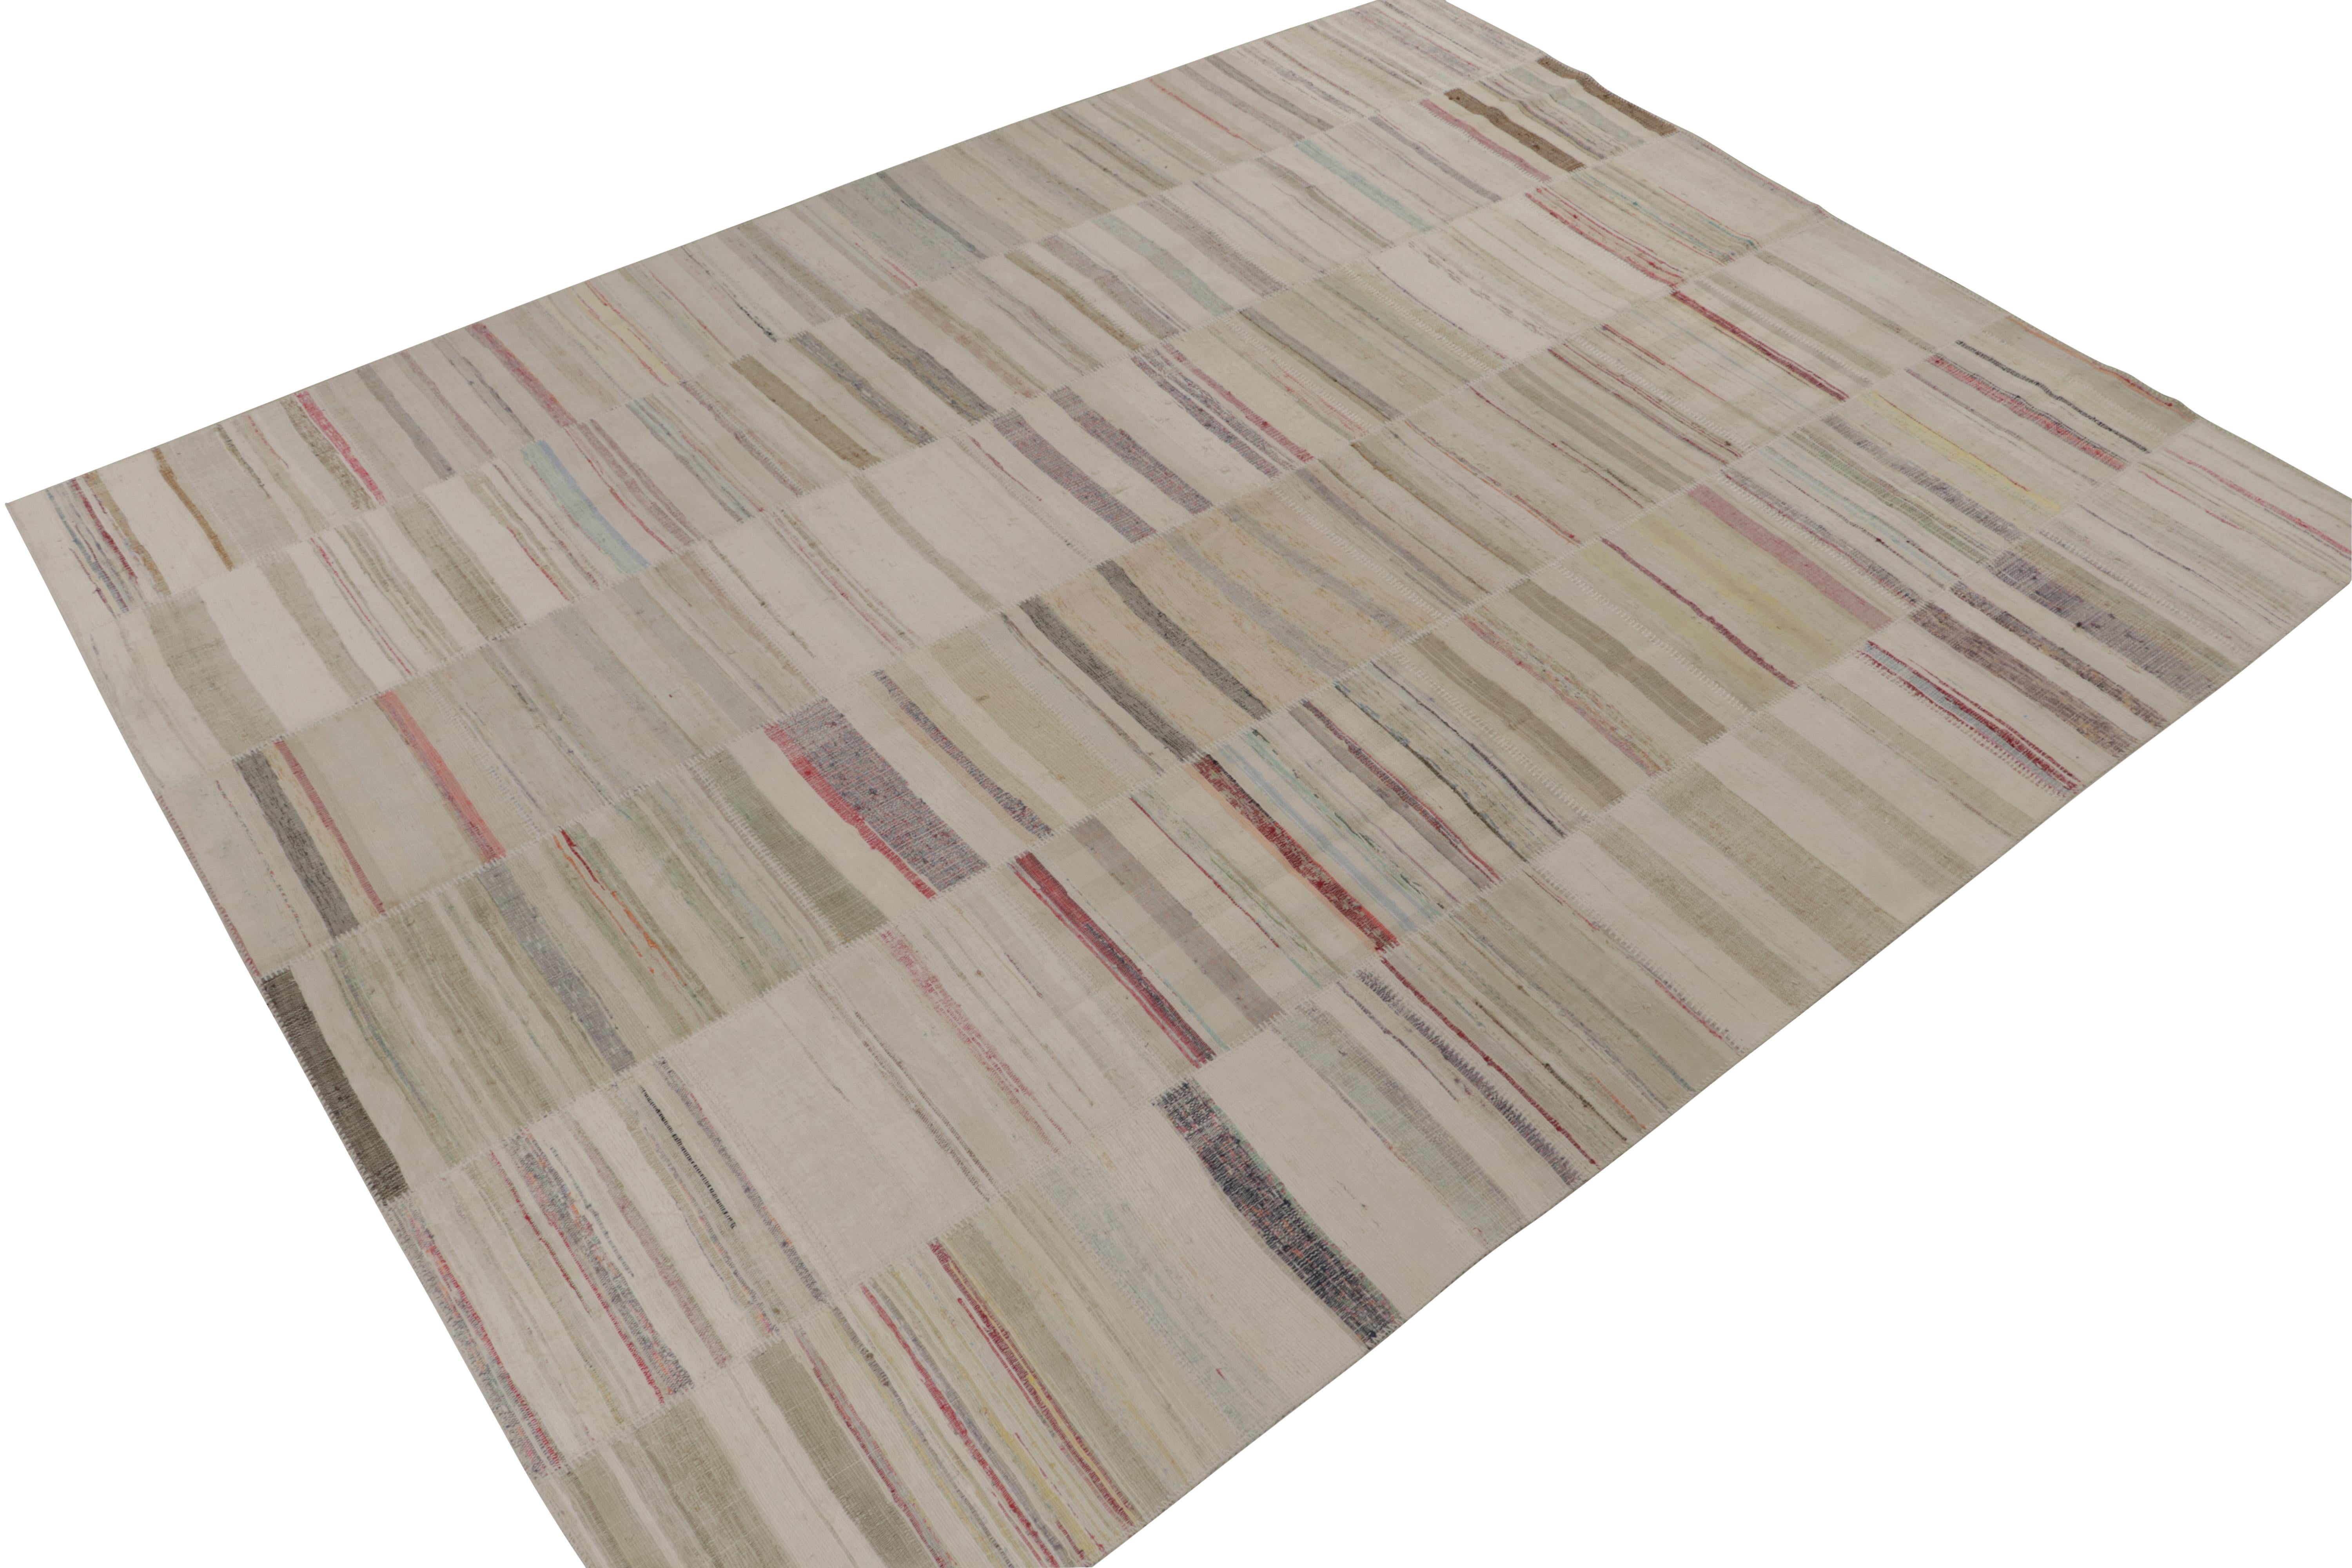 Handwoven in wool, Rug & Kilim presents a 11x13 contemporary rug from their innovative new patchwork kilim collection. 

On the Design: 

This flat weave technique repurposes vintage yarns in polychromatic stripes and striae, achieving a playful